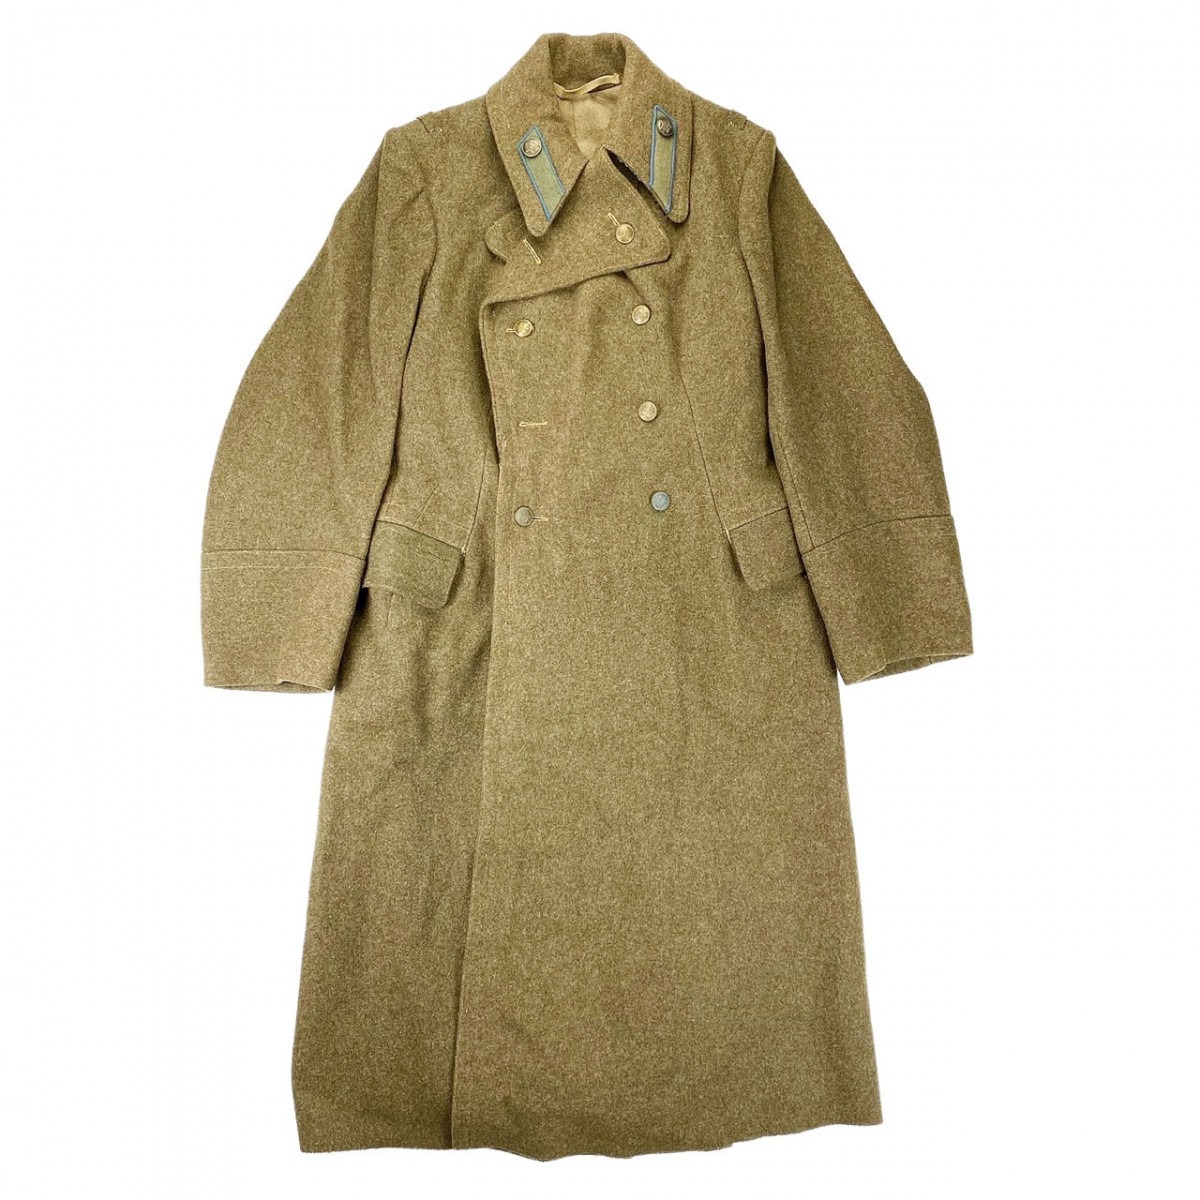 Original WWII Russian Airforce overcoat - Lend-Lease cloth ...